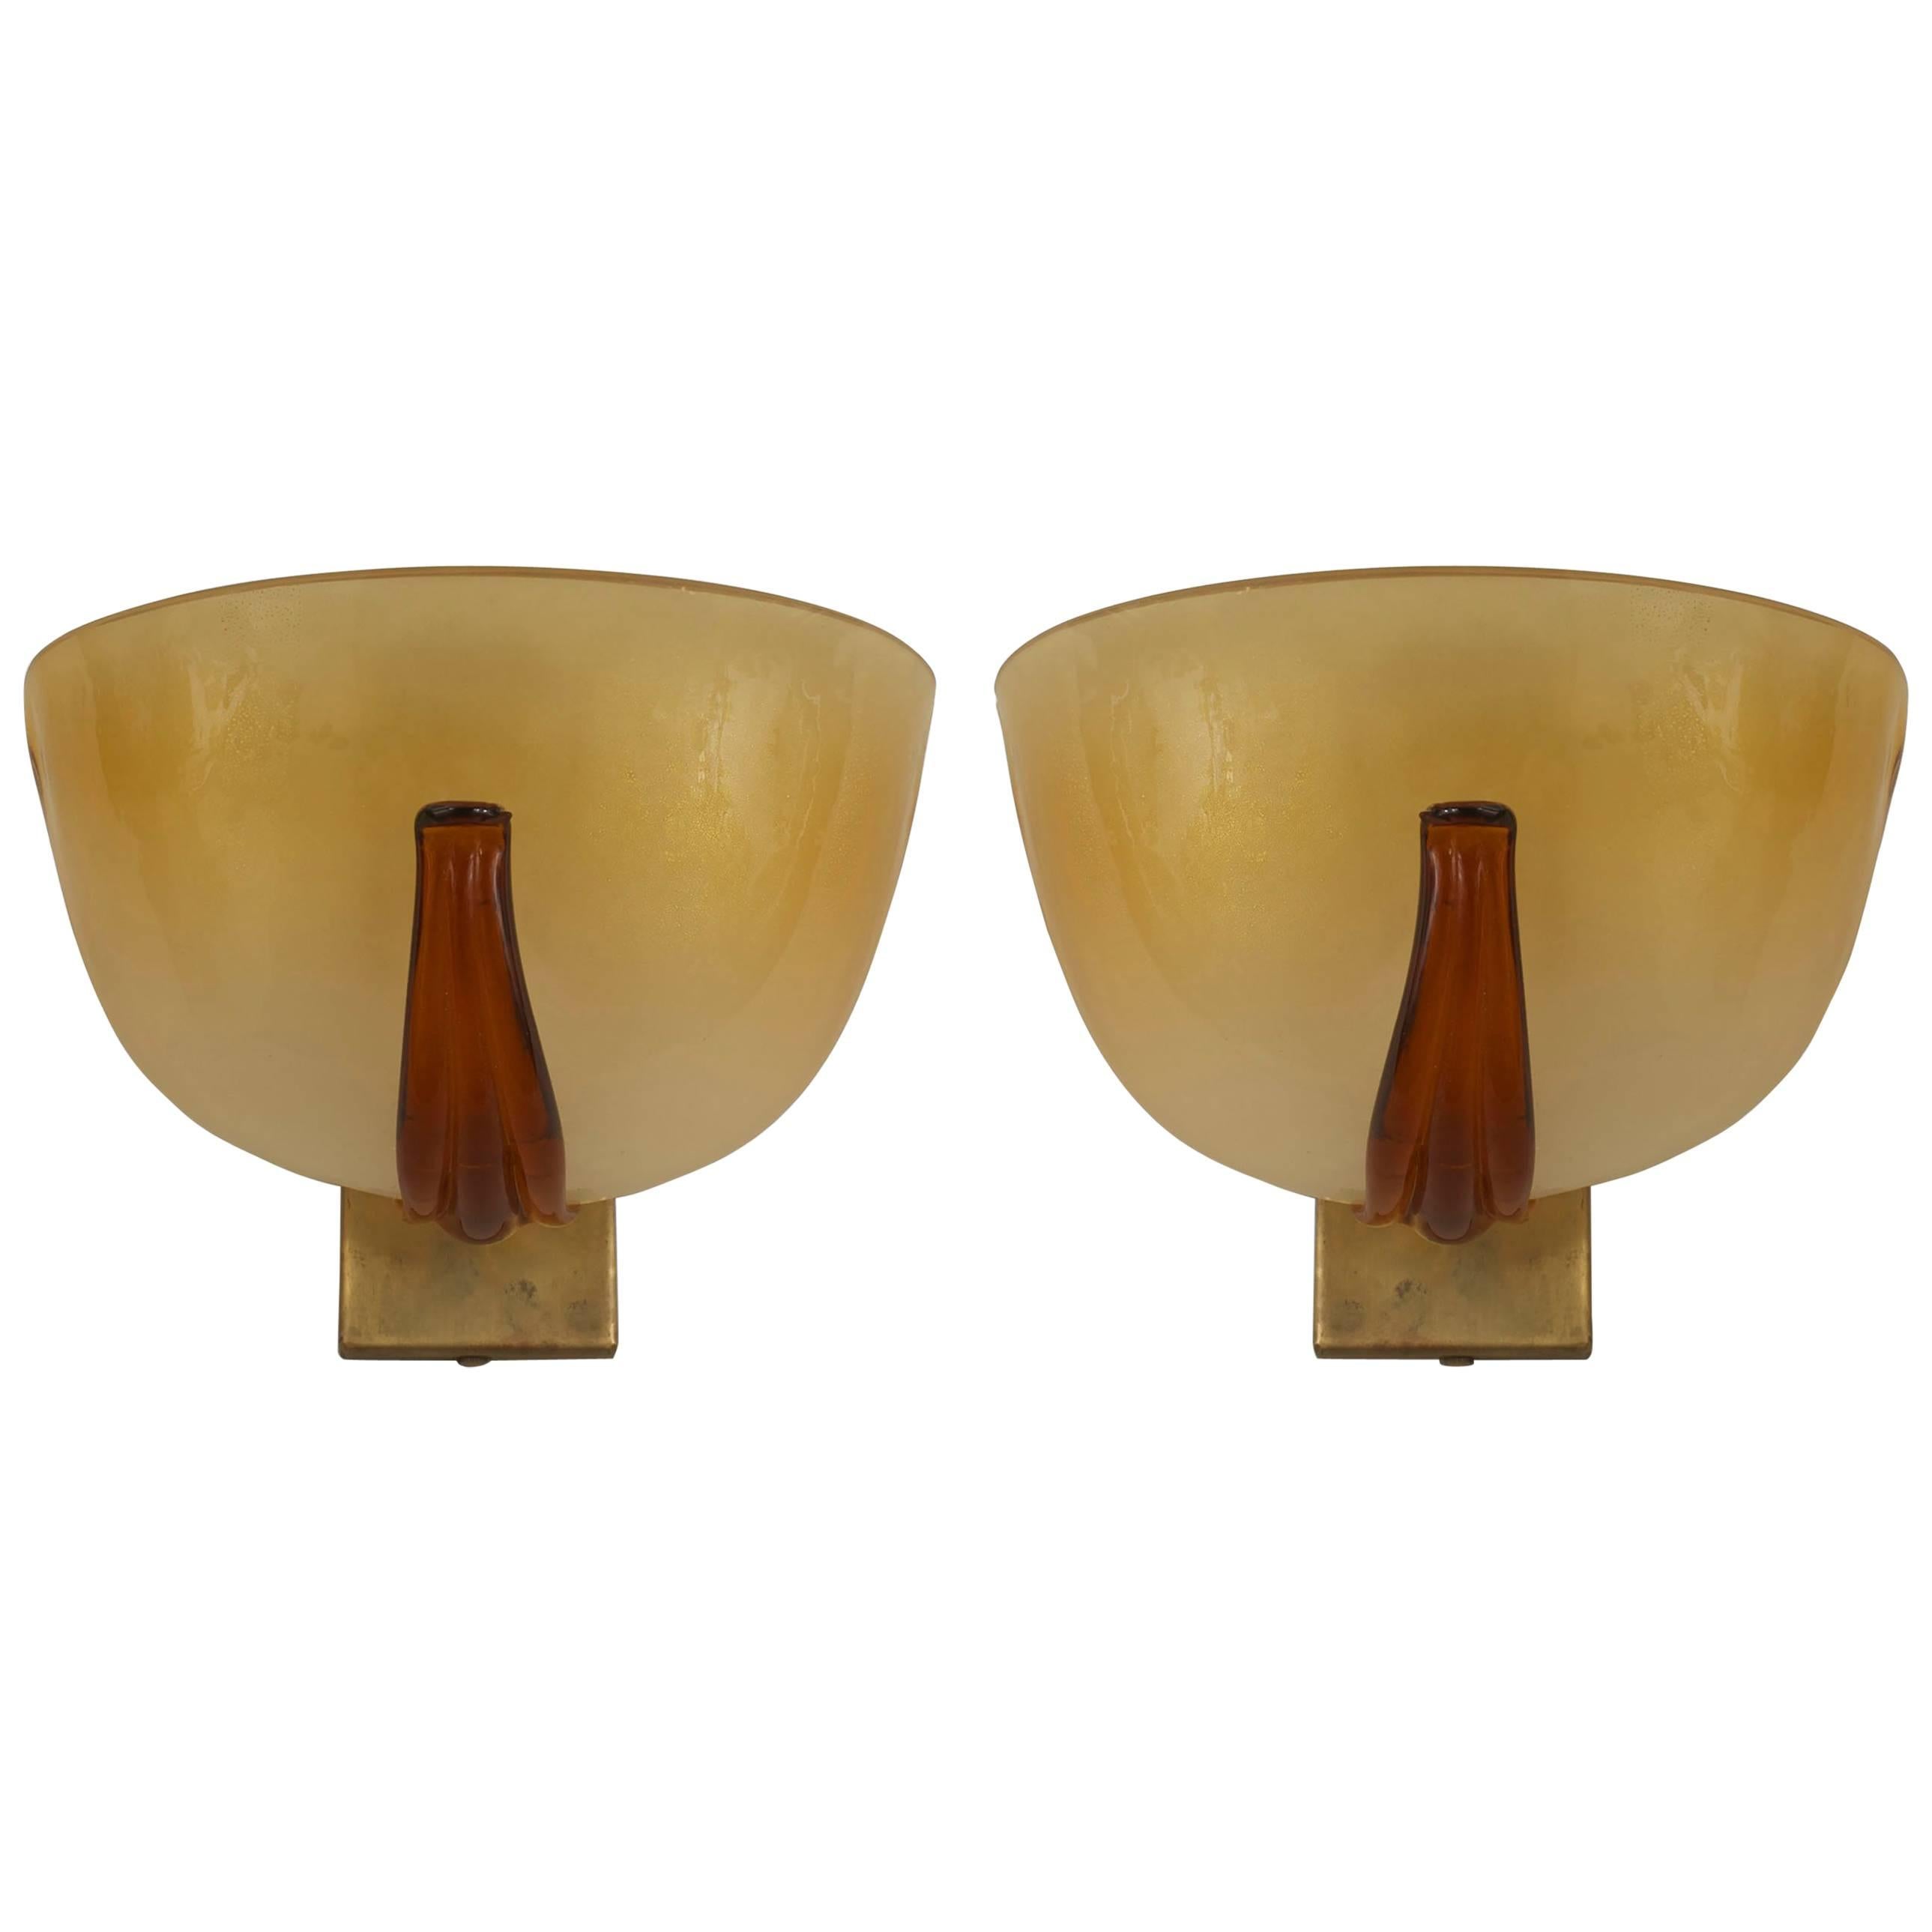 Pair of Italian 1940s Venetian Murano Gold Dusted Glass Wall Sconces